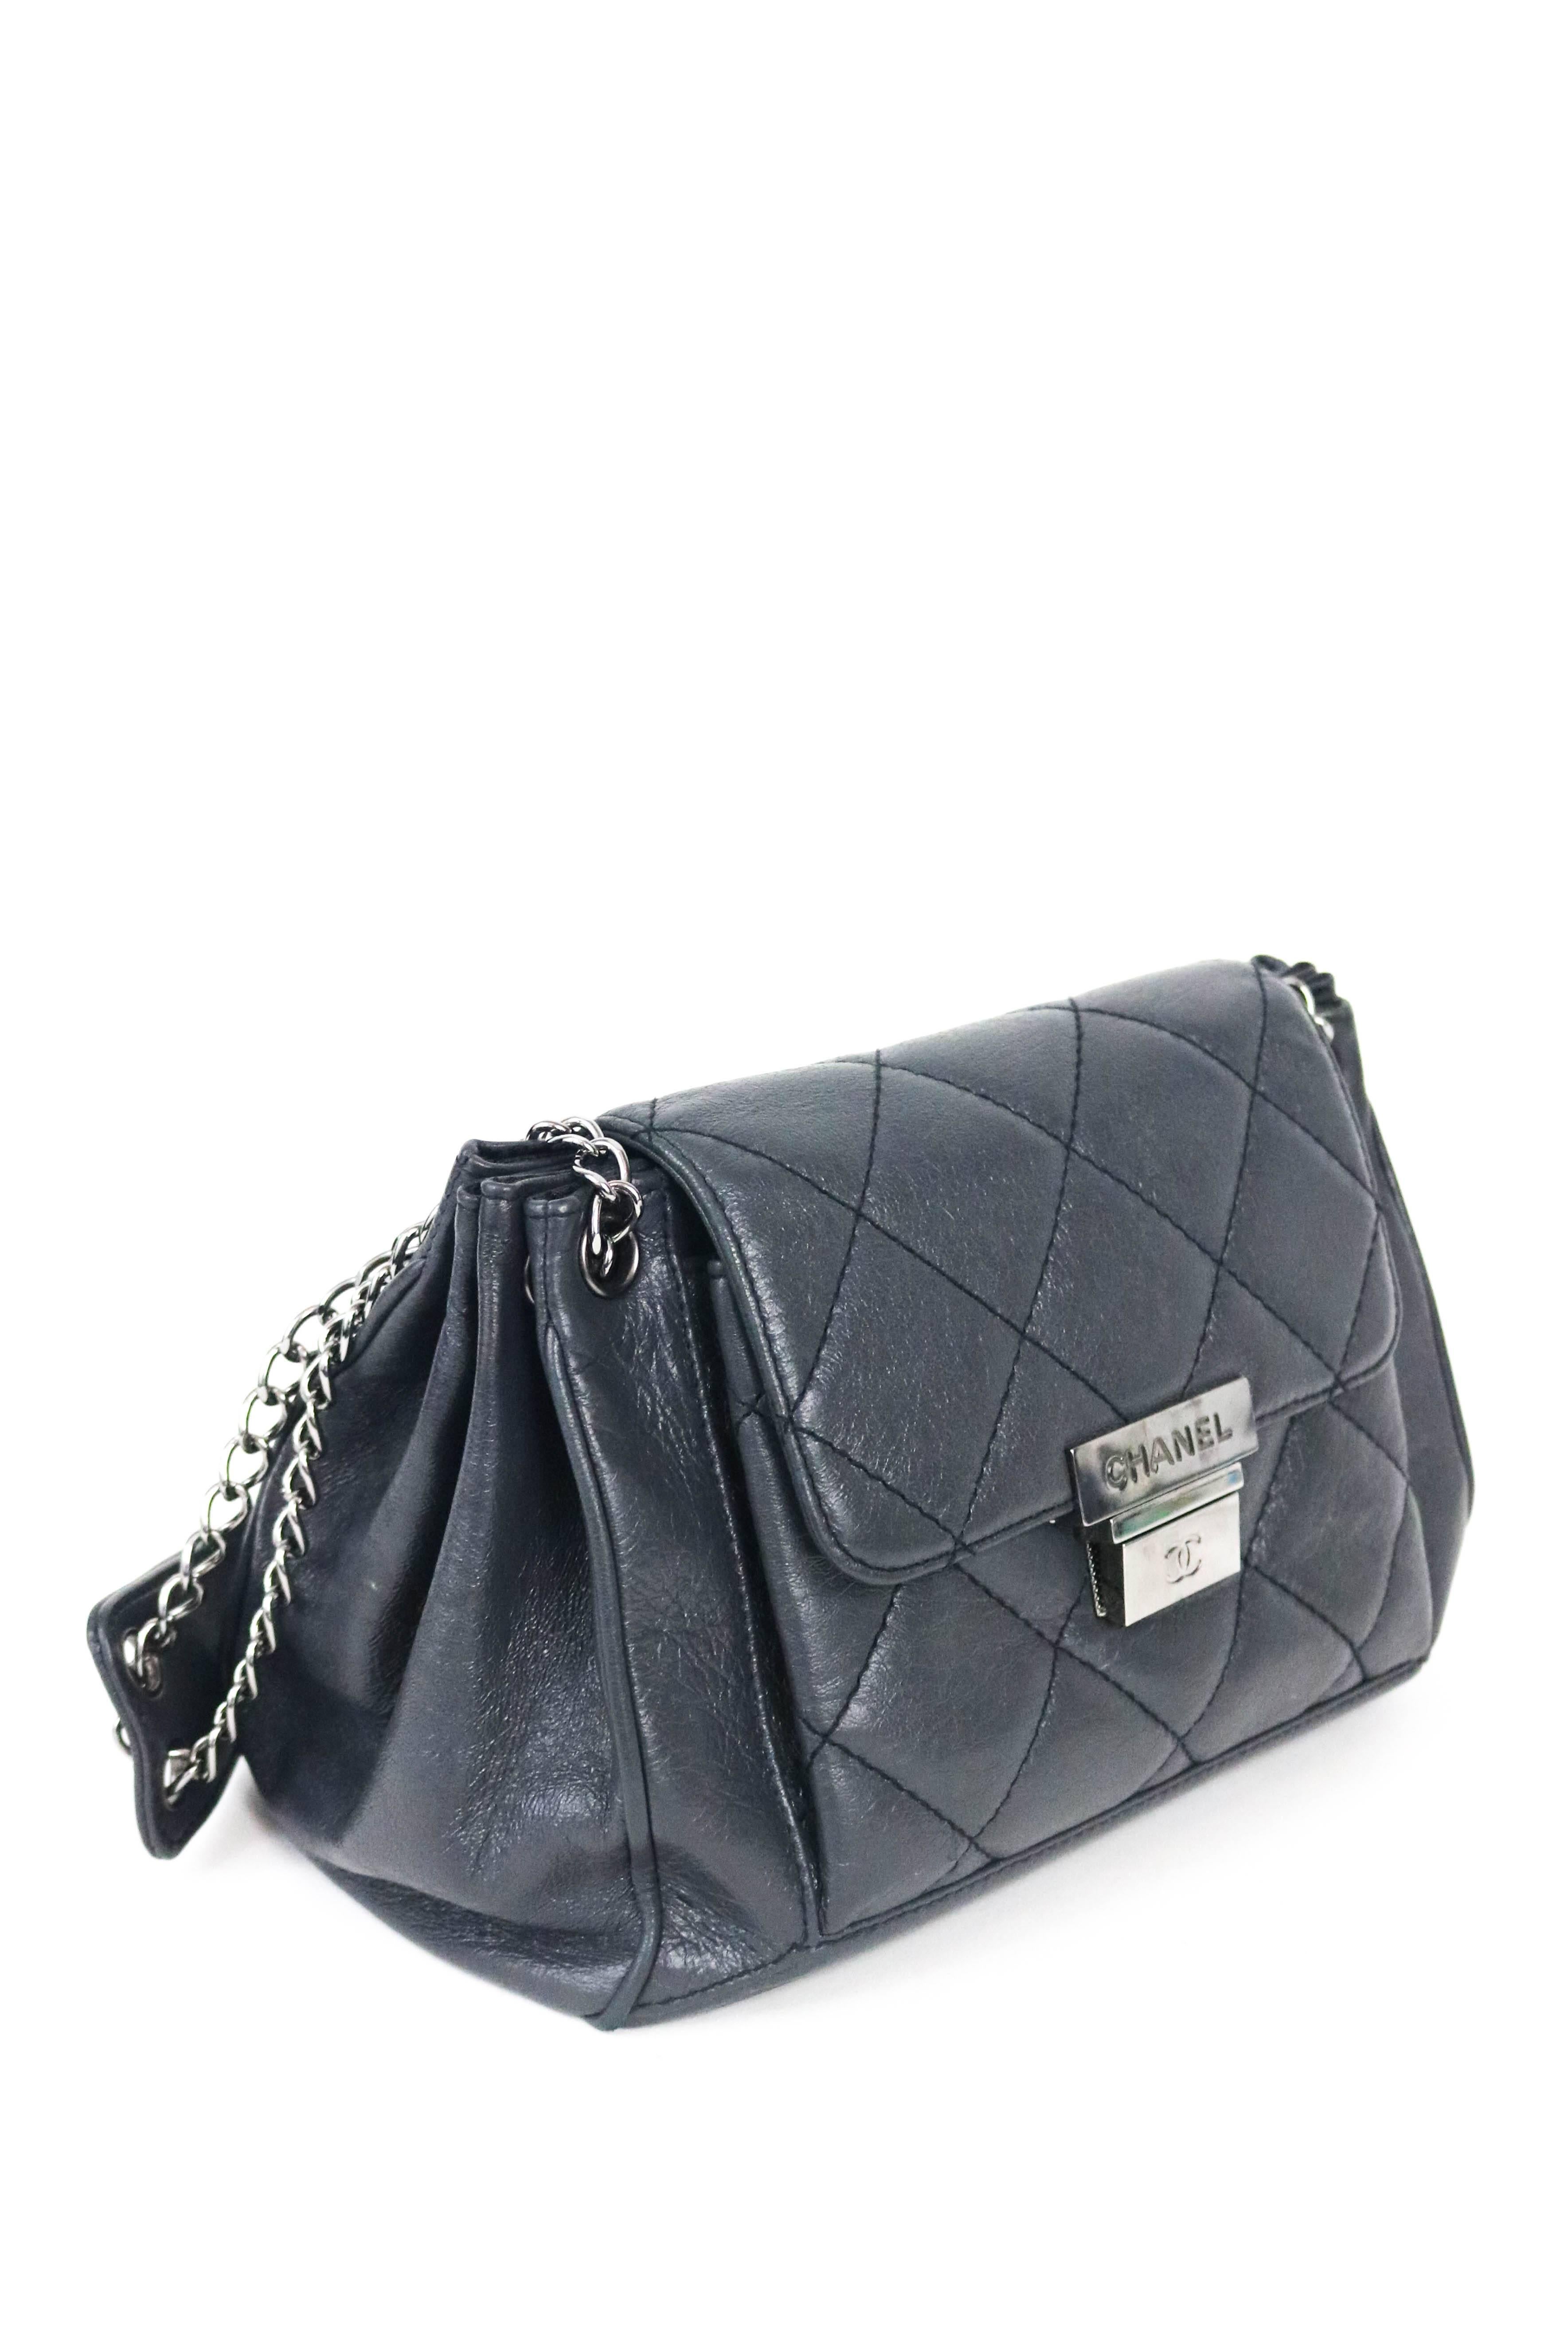 Offered is an authentic and darling handbag from Chanel, in a metallic pewter color a small quilted double chain shoulder bag.  Gunmetal hardware perfectly compliments the color of the supple calfskin. Chanel logo is embossed into lock on front. 